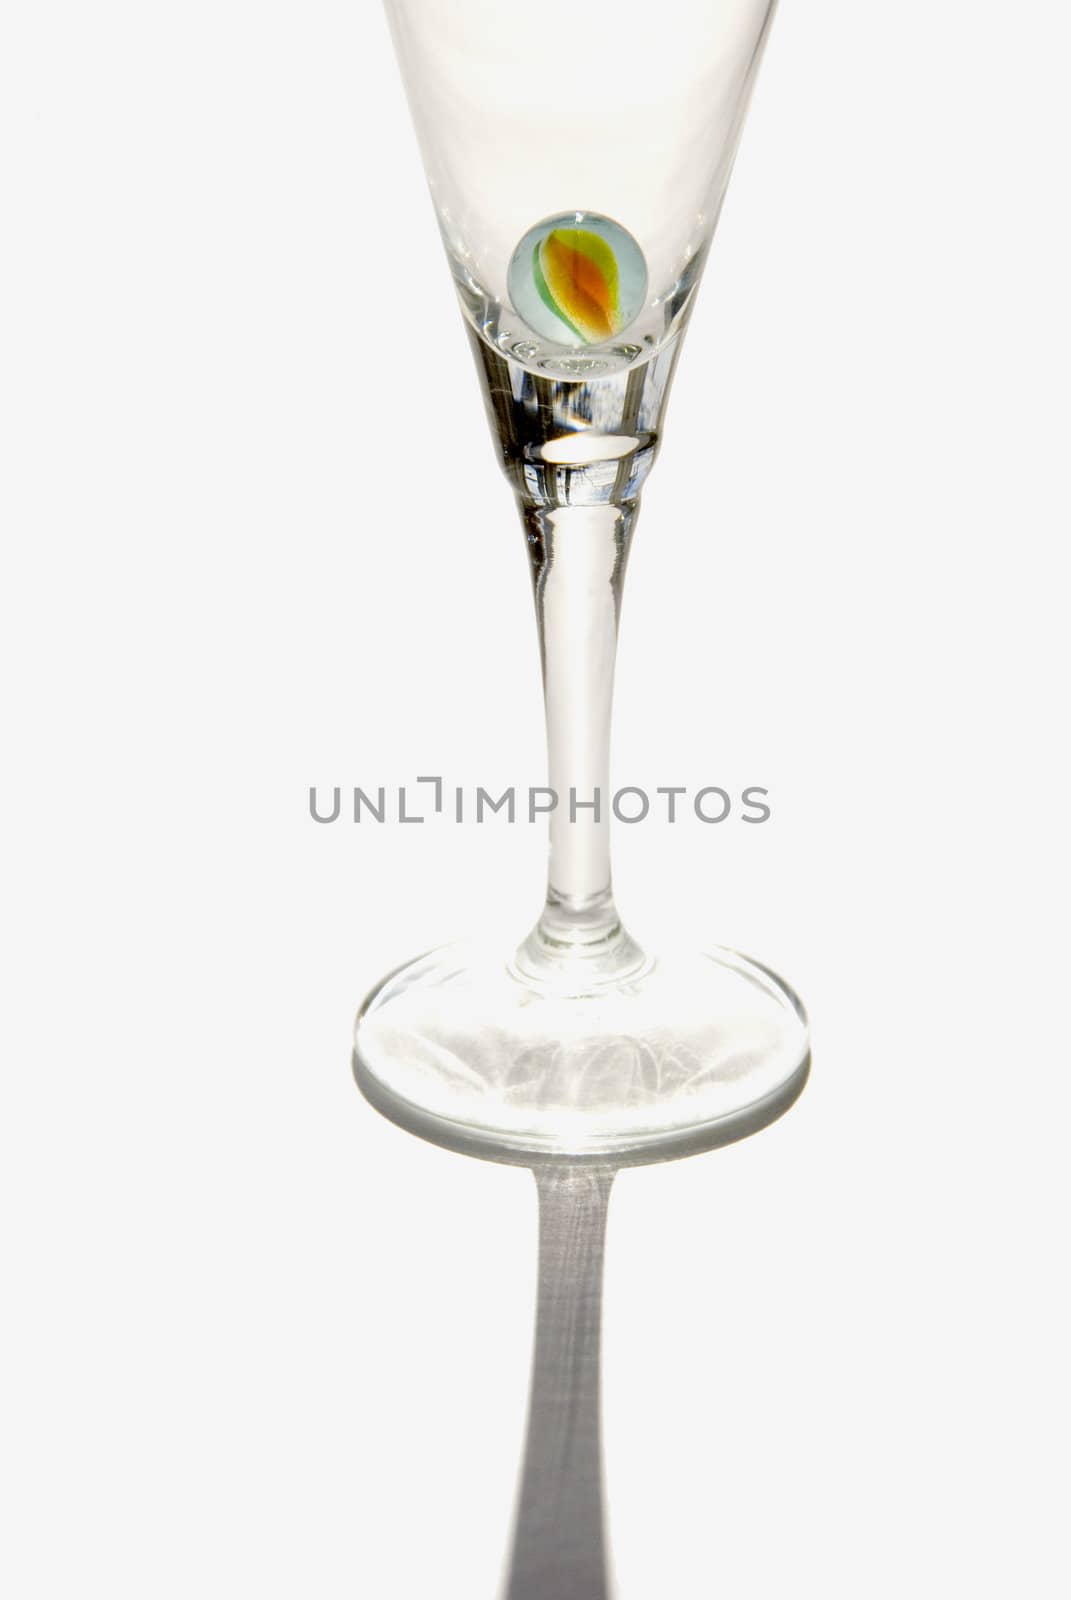 Cup with a colorful slide in white background